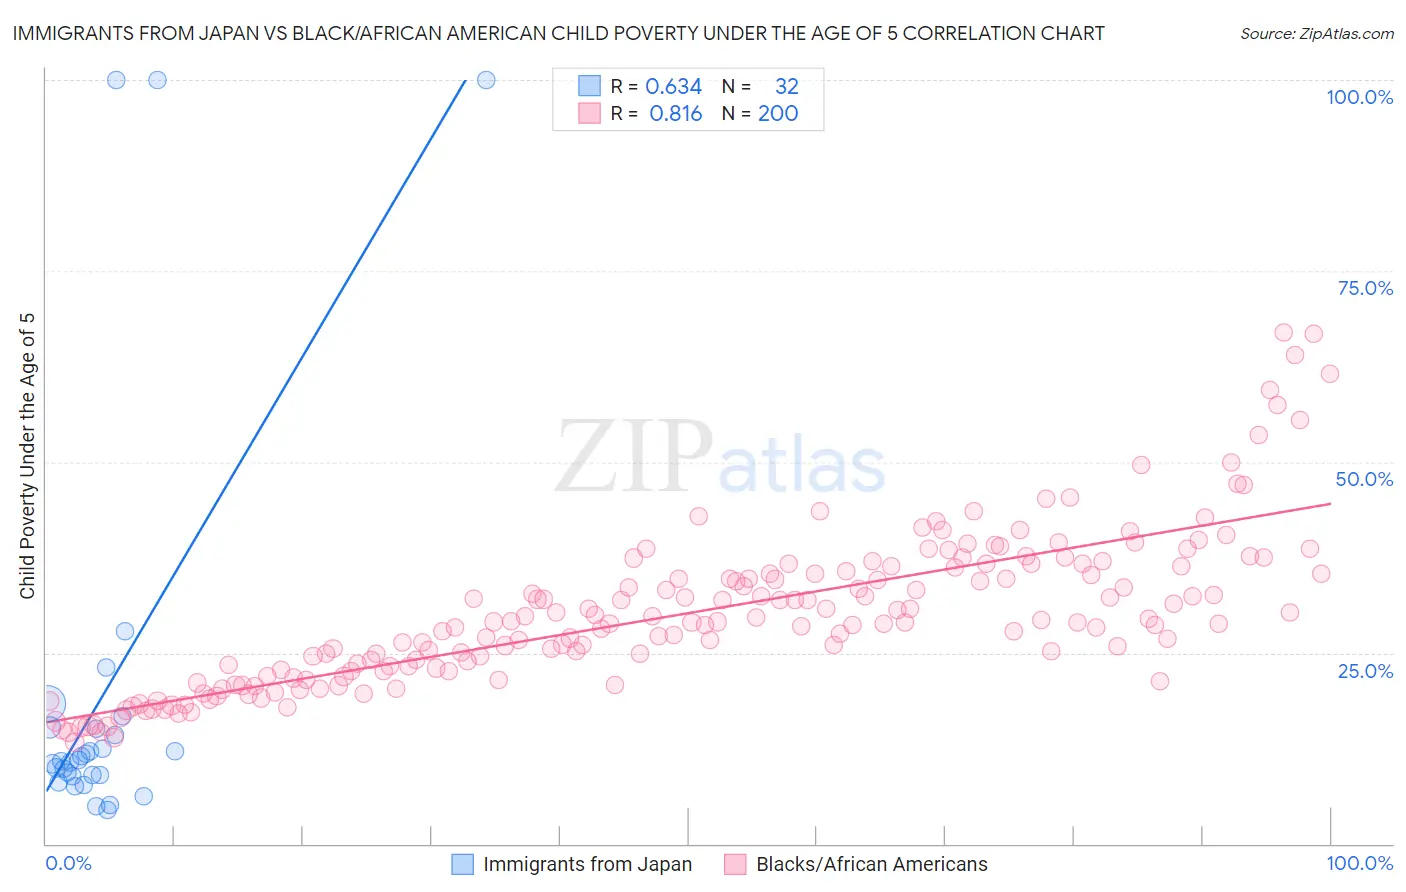 Immigrants from Japan vs Black/African American Child Poverty Under the Age of 5